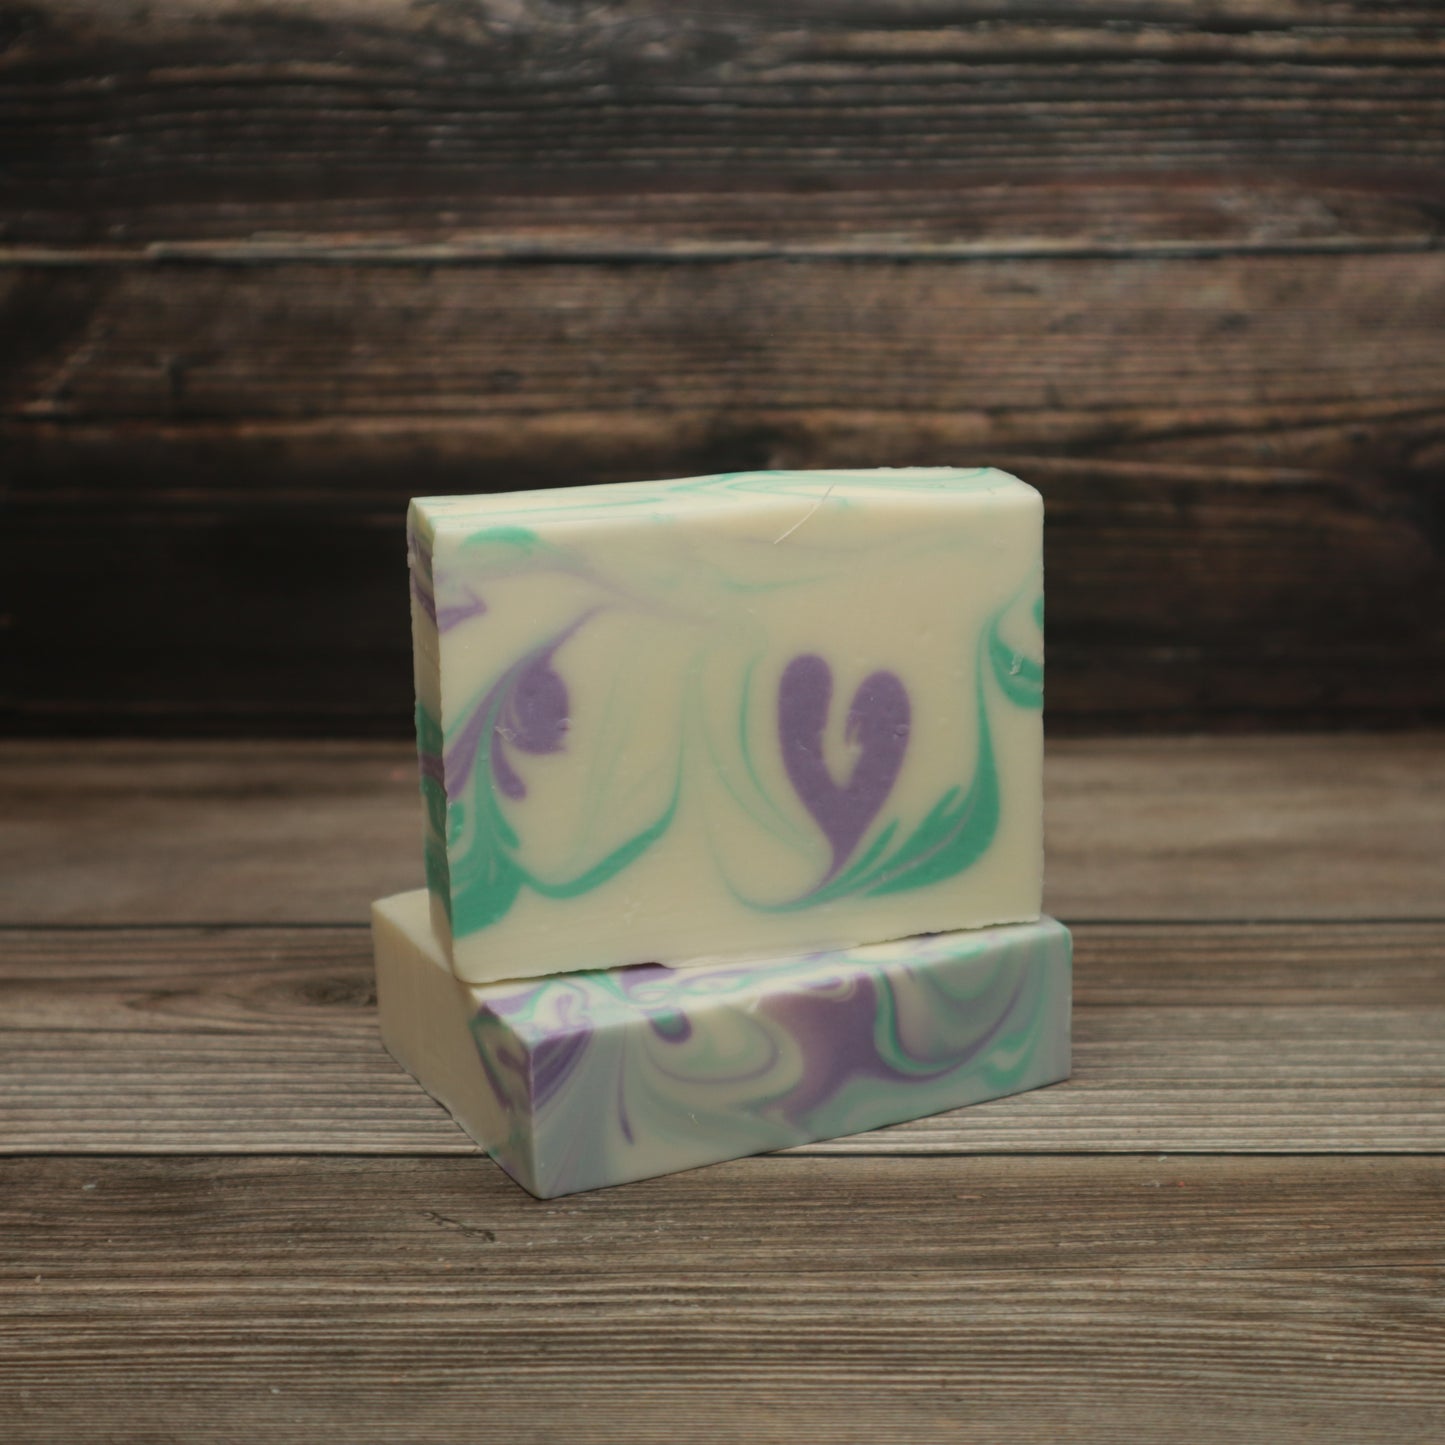 Sweet Clover Soap with Aloe